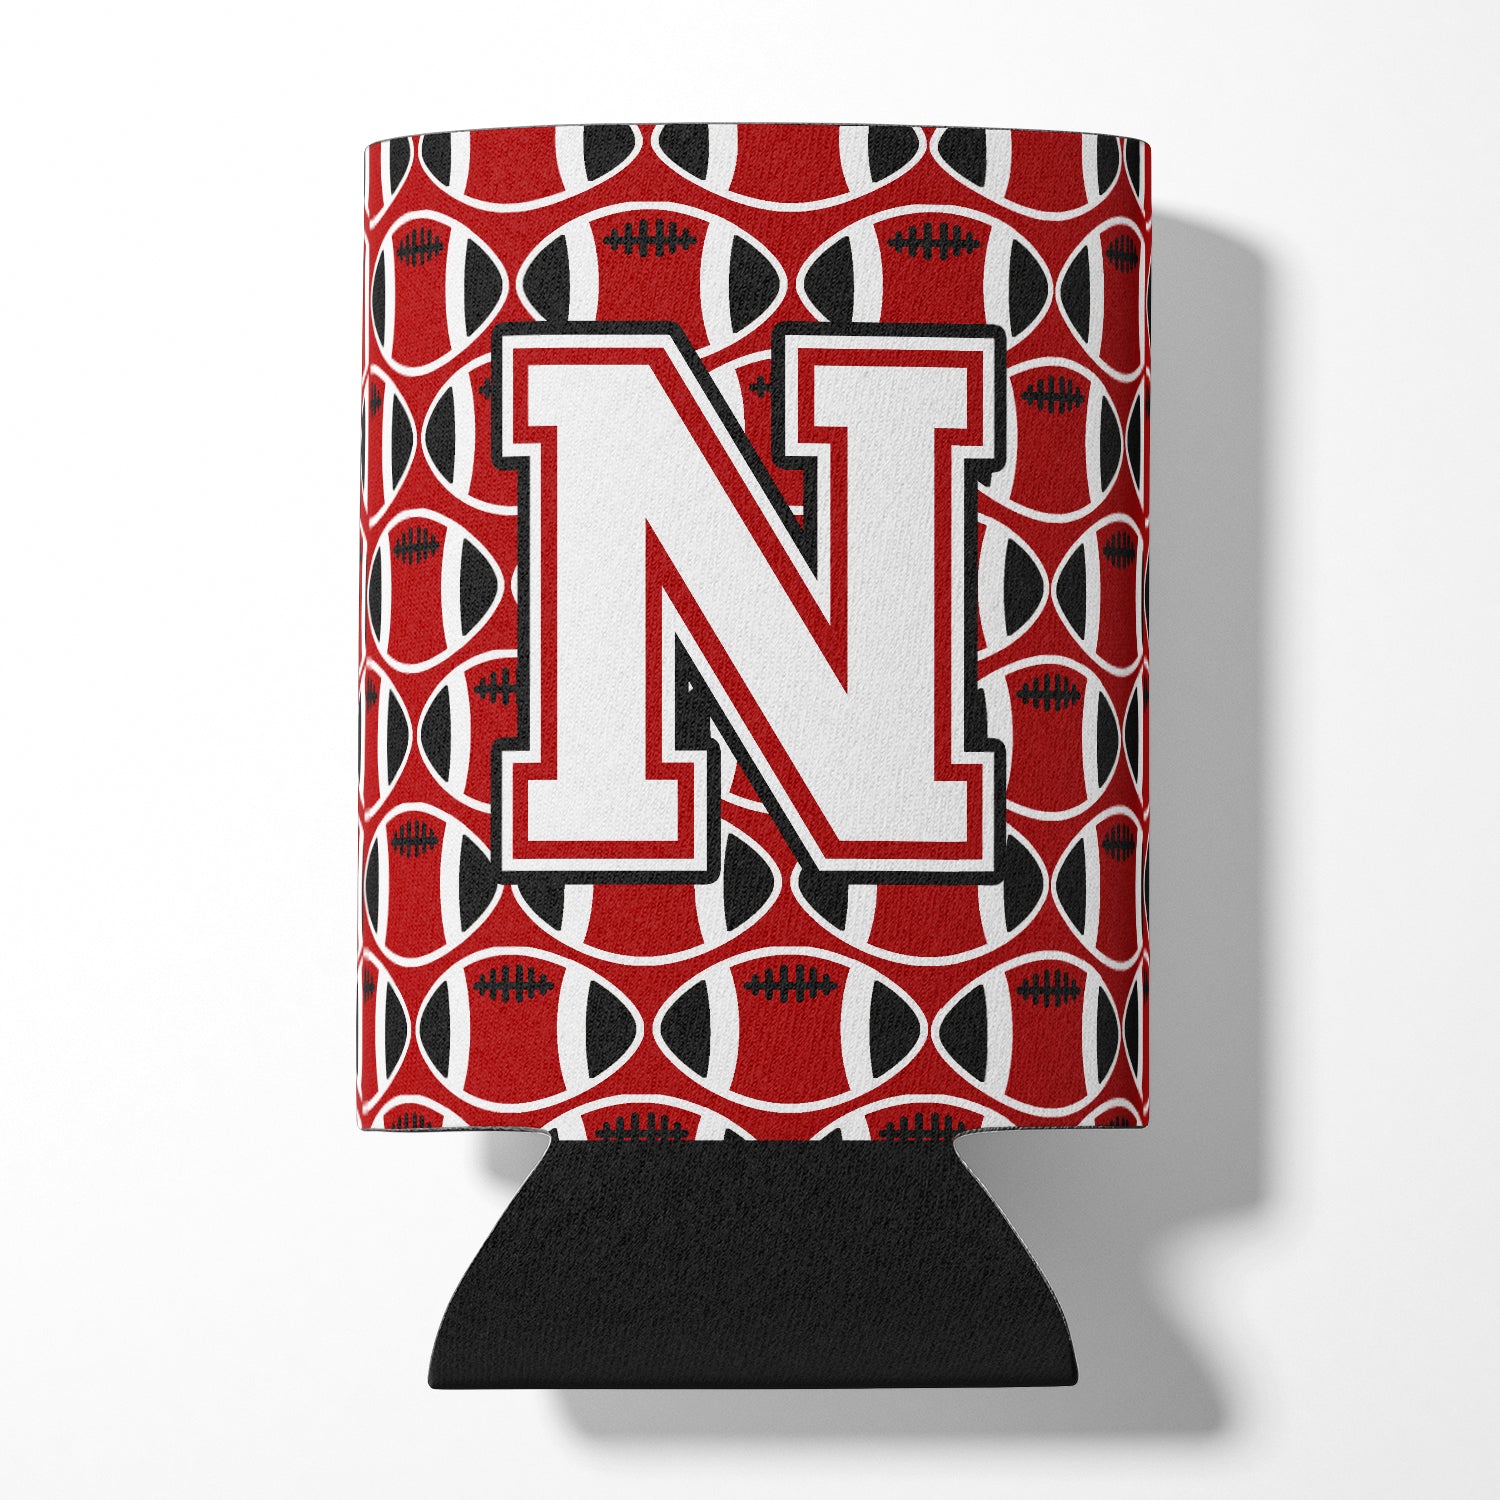 Letter N Football Cardinal and White Can or Bottle Hugger CJ1082-NCC.